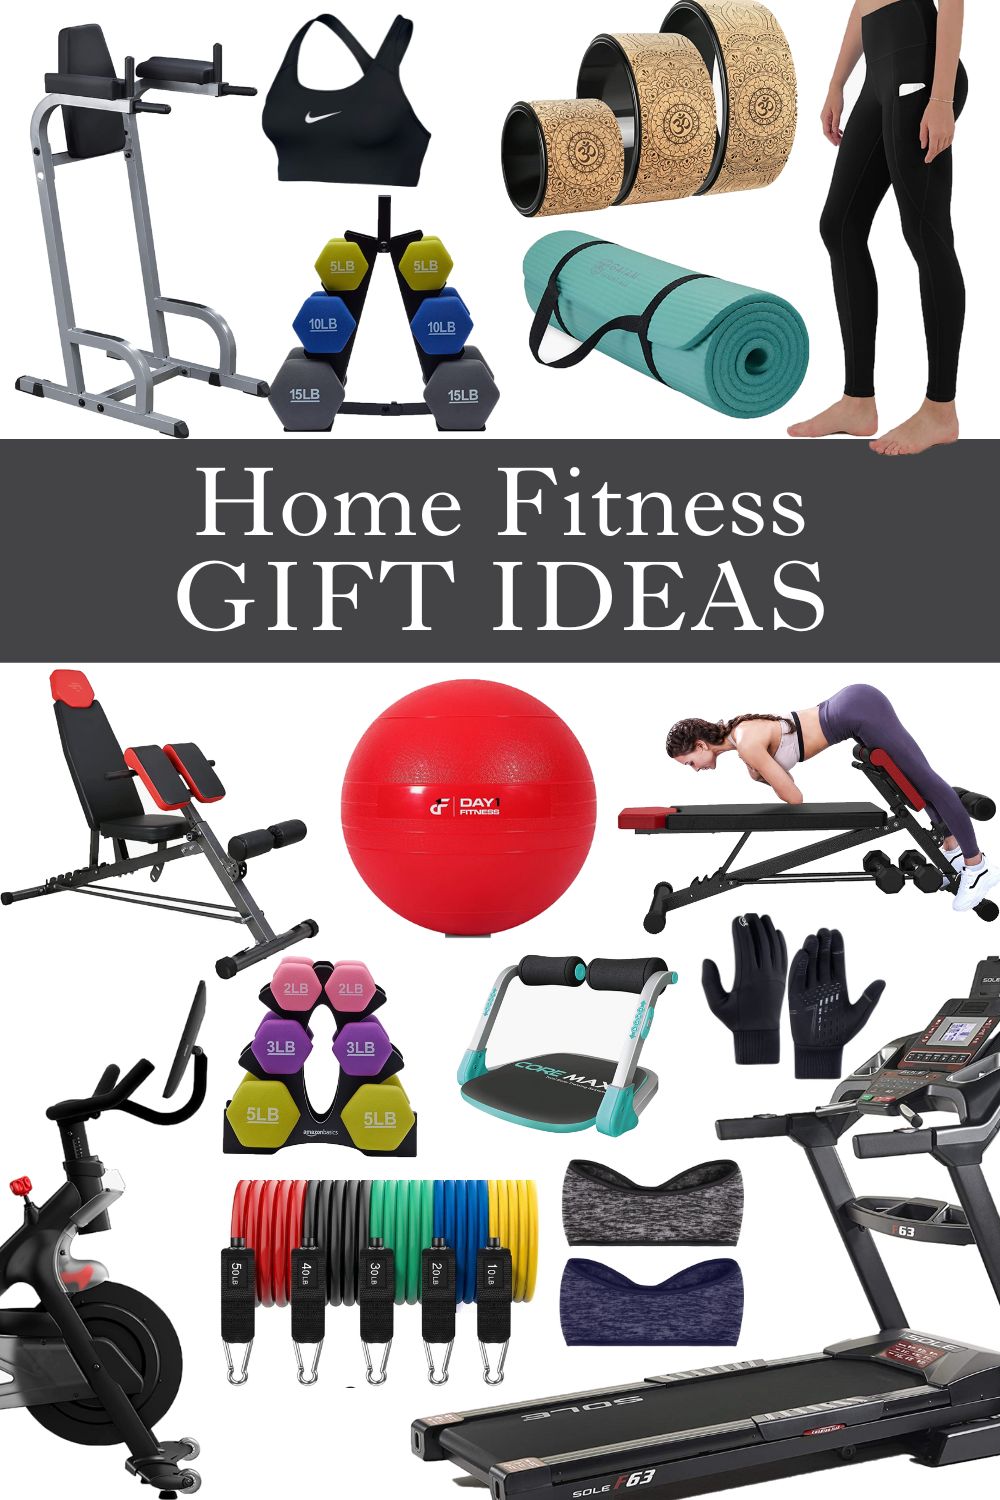 Gift ideas for working out